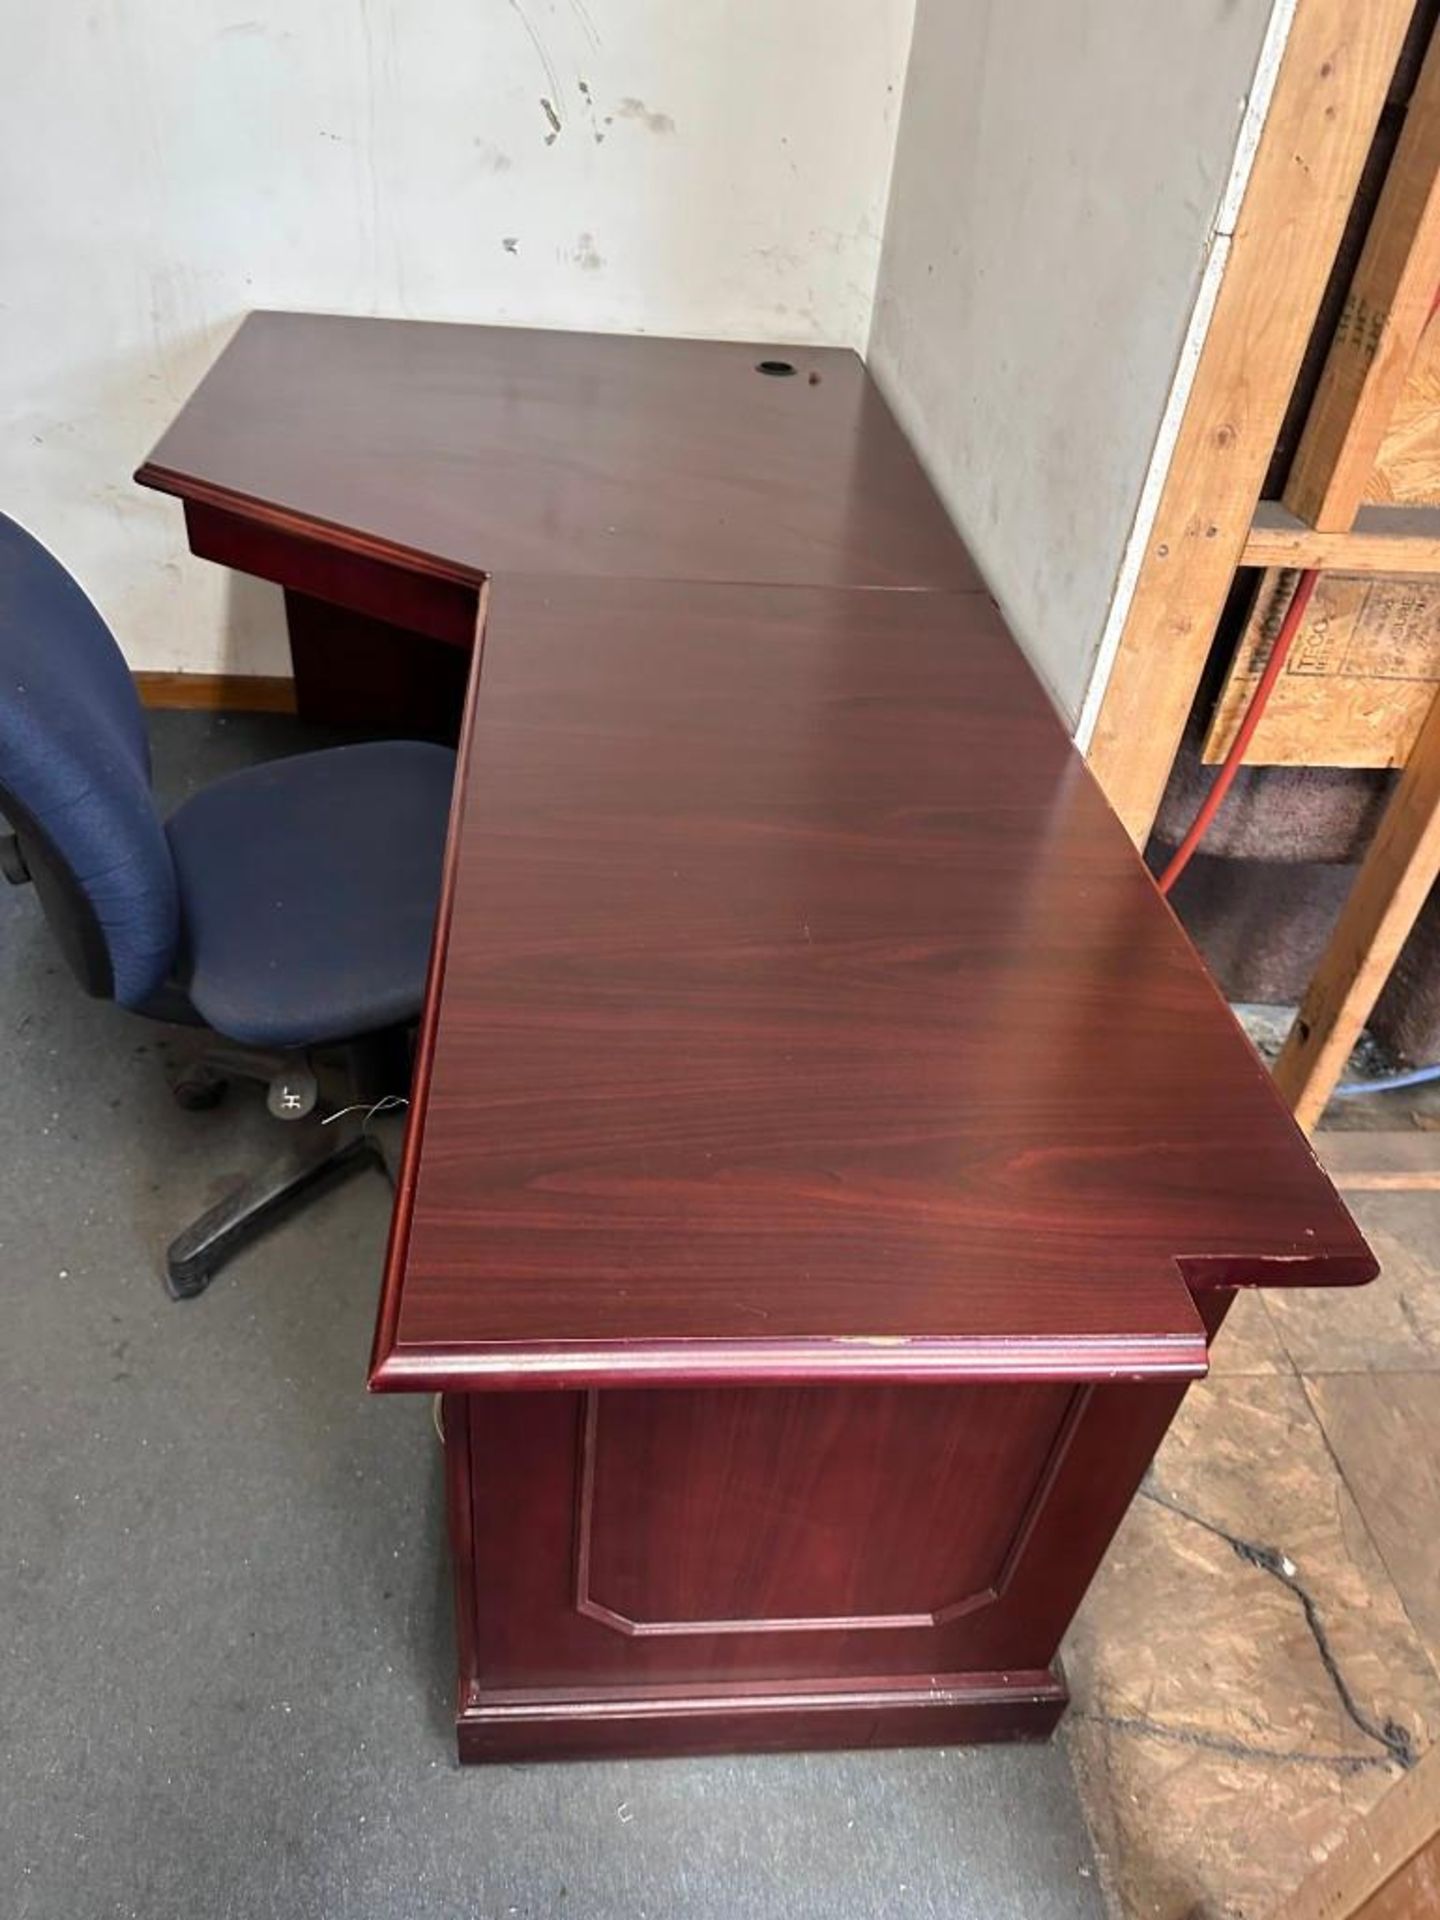 OFFICE FURNITURE - CHERRY DESK - Image 2 of 2